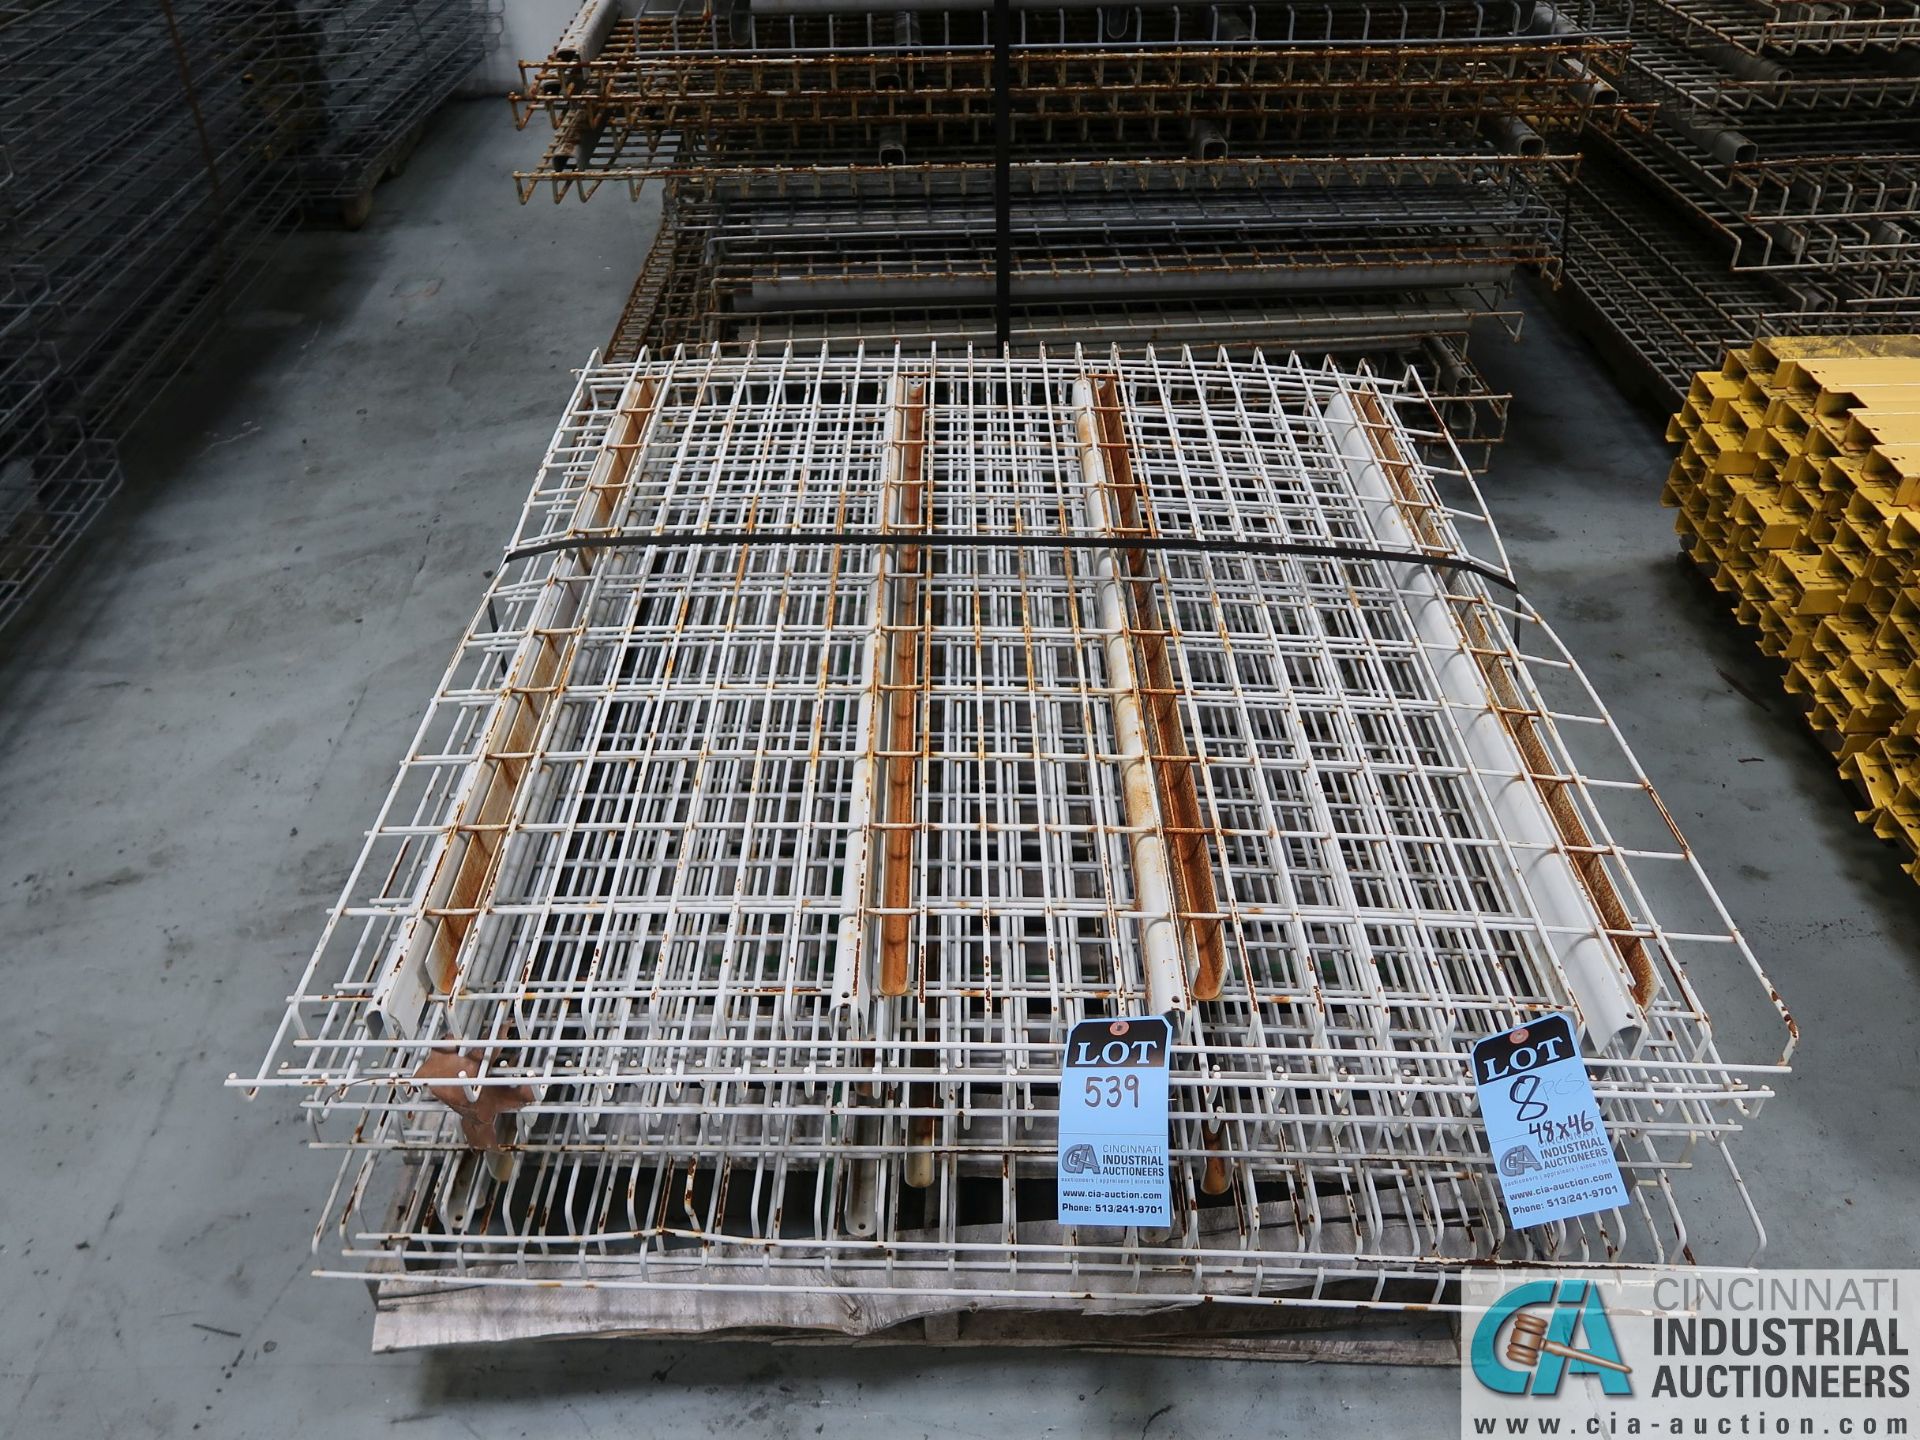 PIECES 46" X 48" PALLET RACK WIRE DECKING *$25.00 RIGGING FEE DUE TO INDUSTRIAL SERVICES AND SALES*